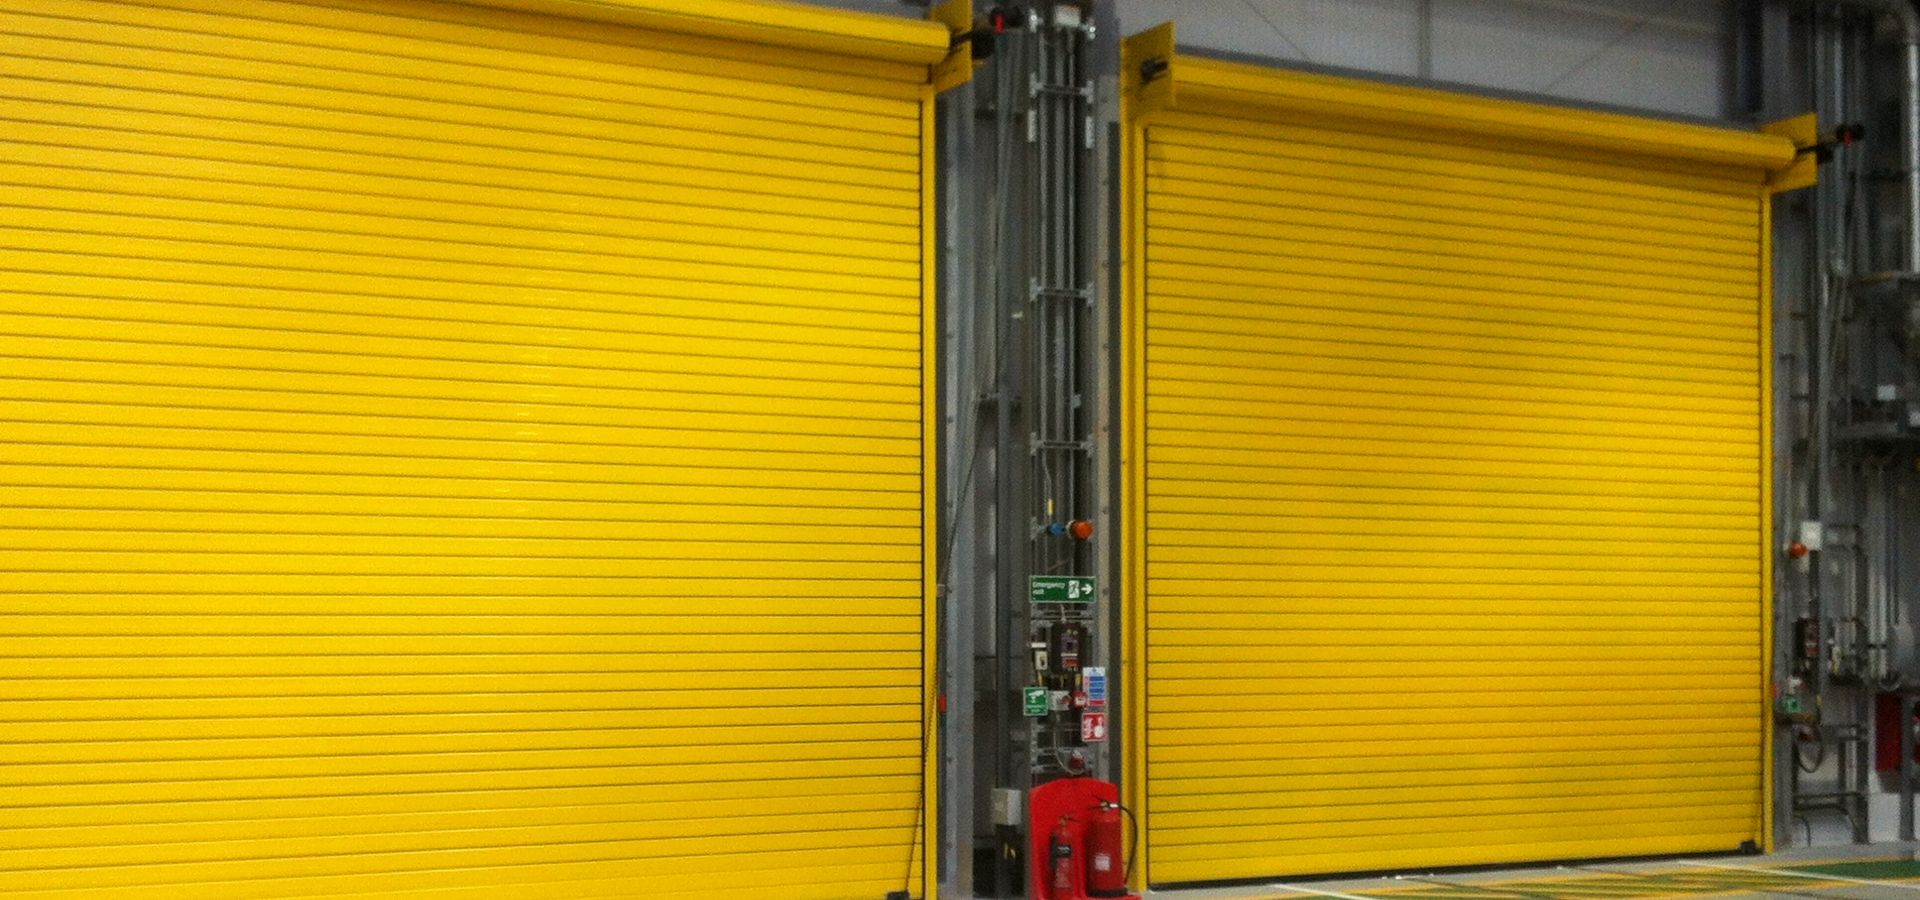 Insulated Shutters